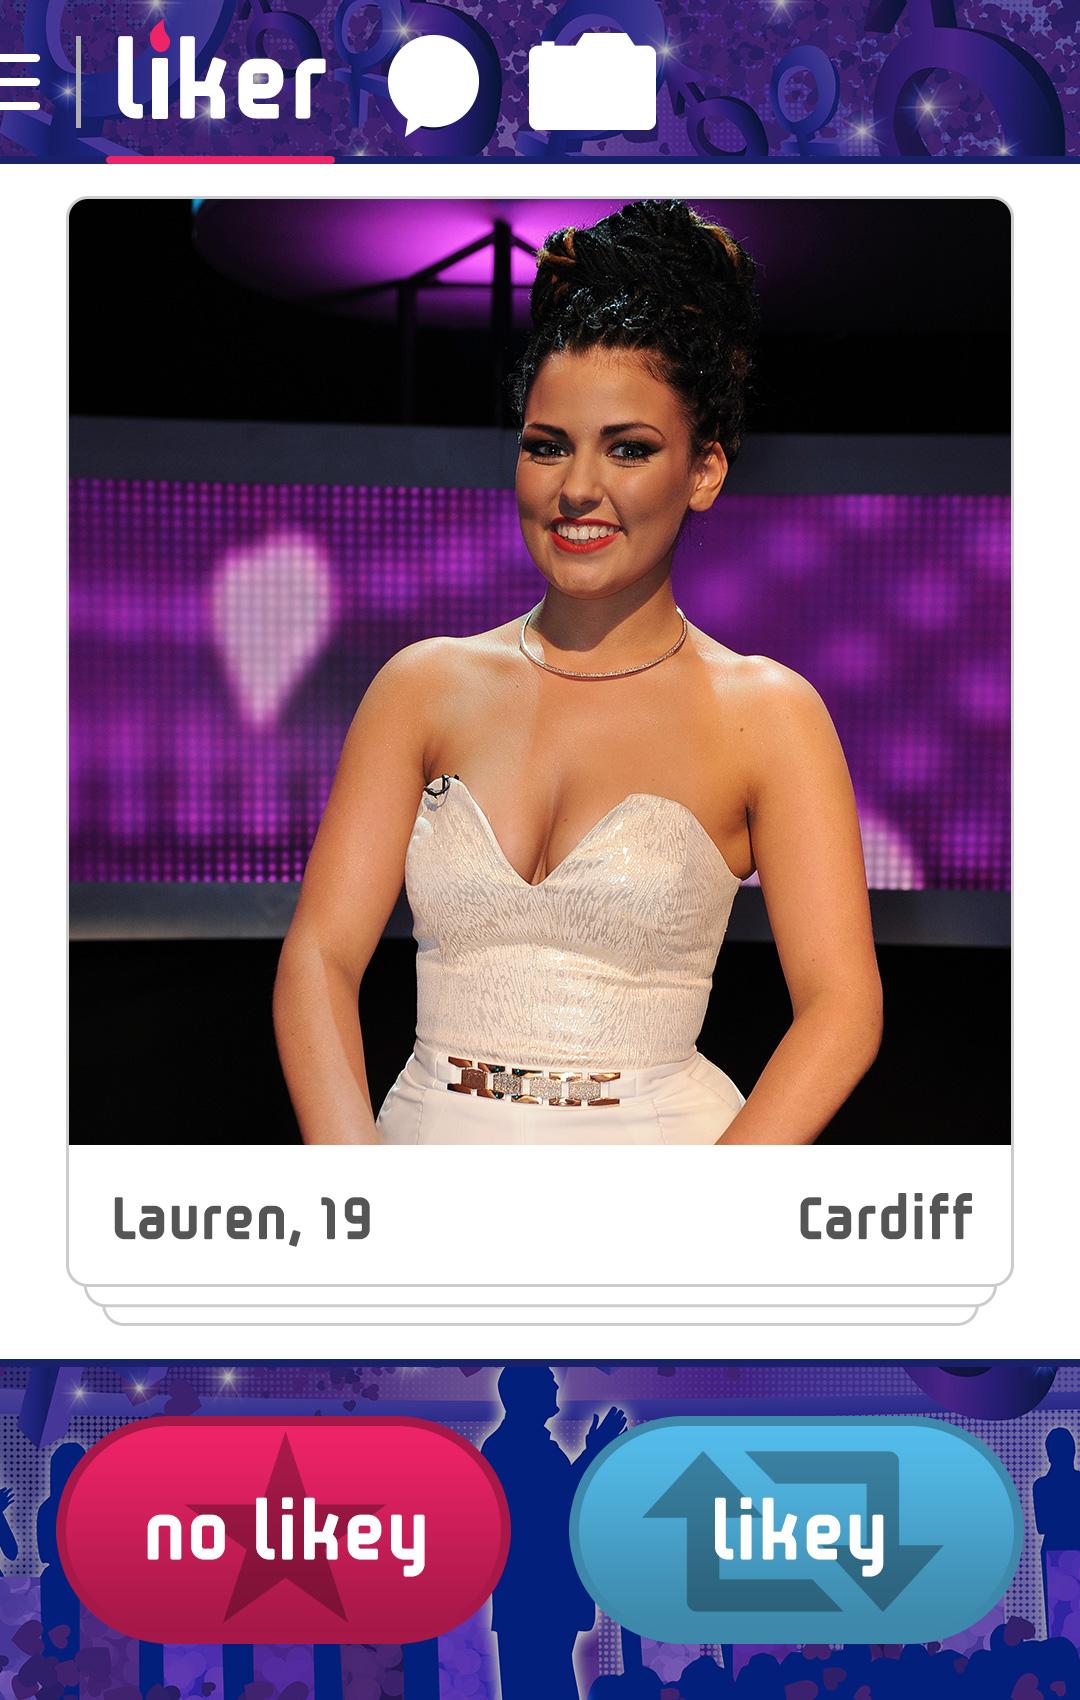 Lady lauren take me out